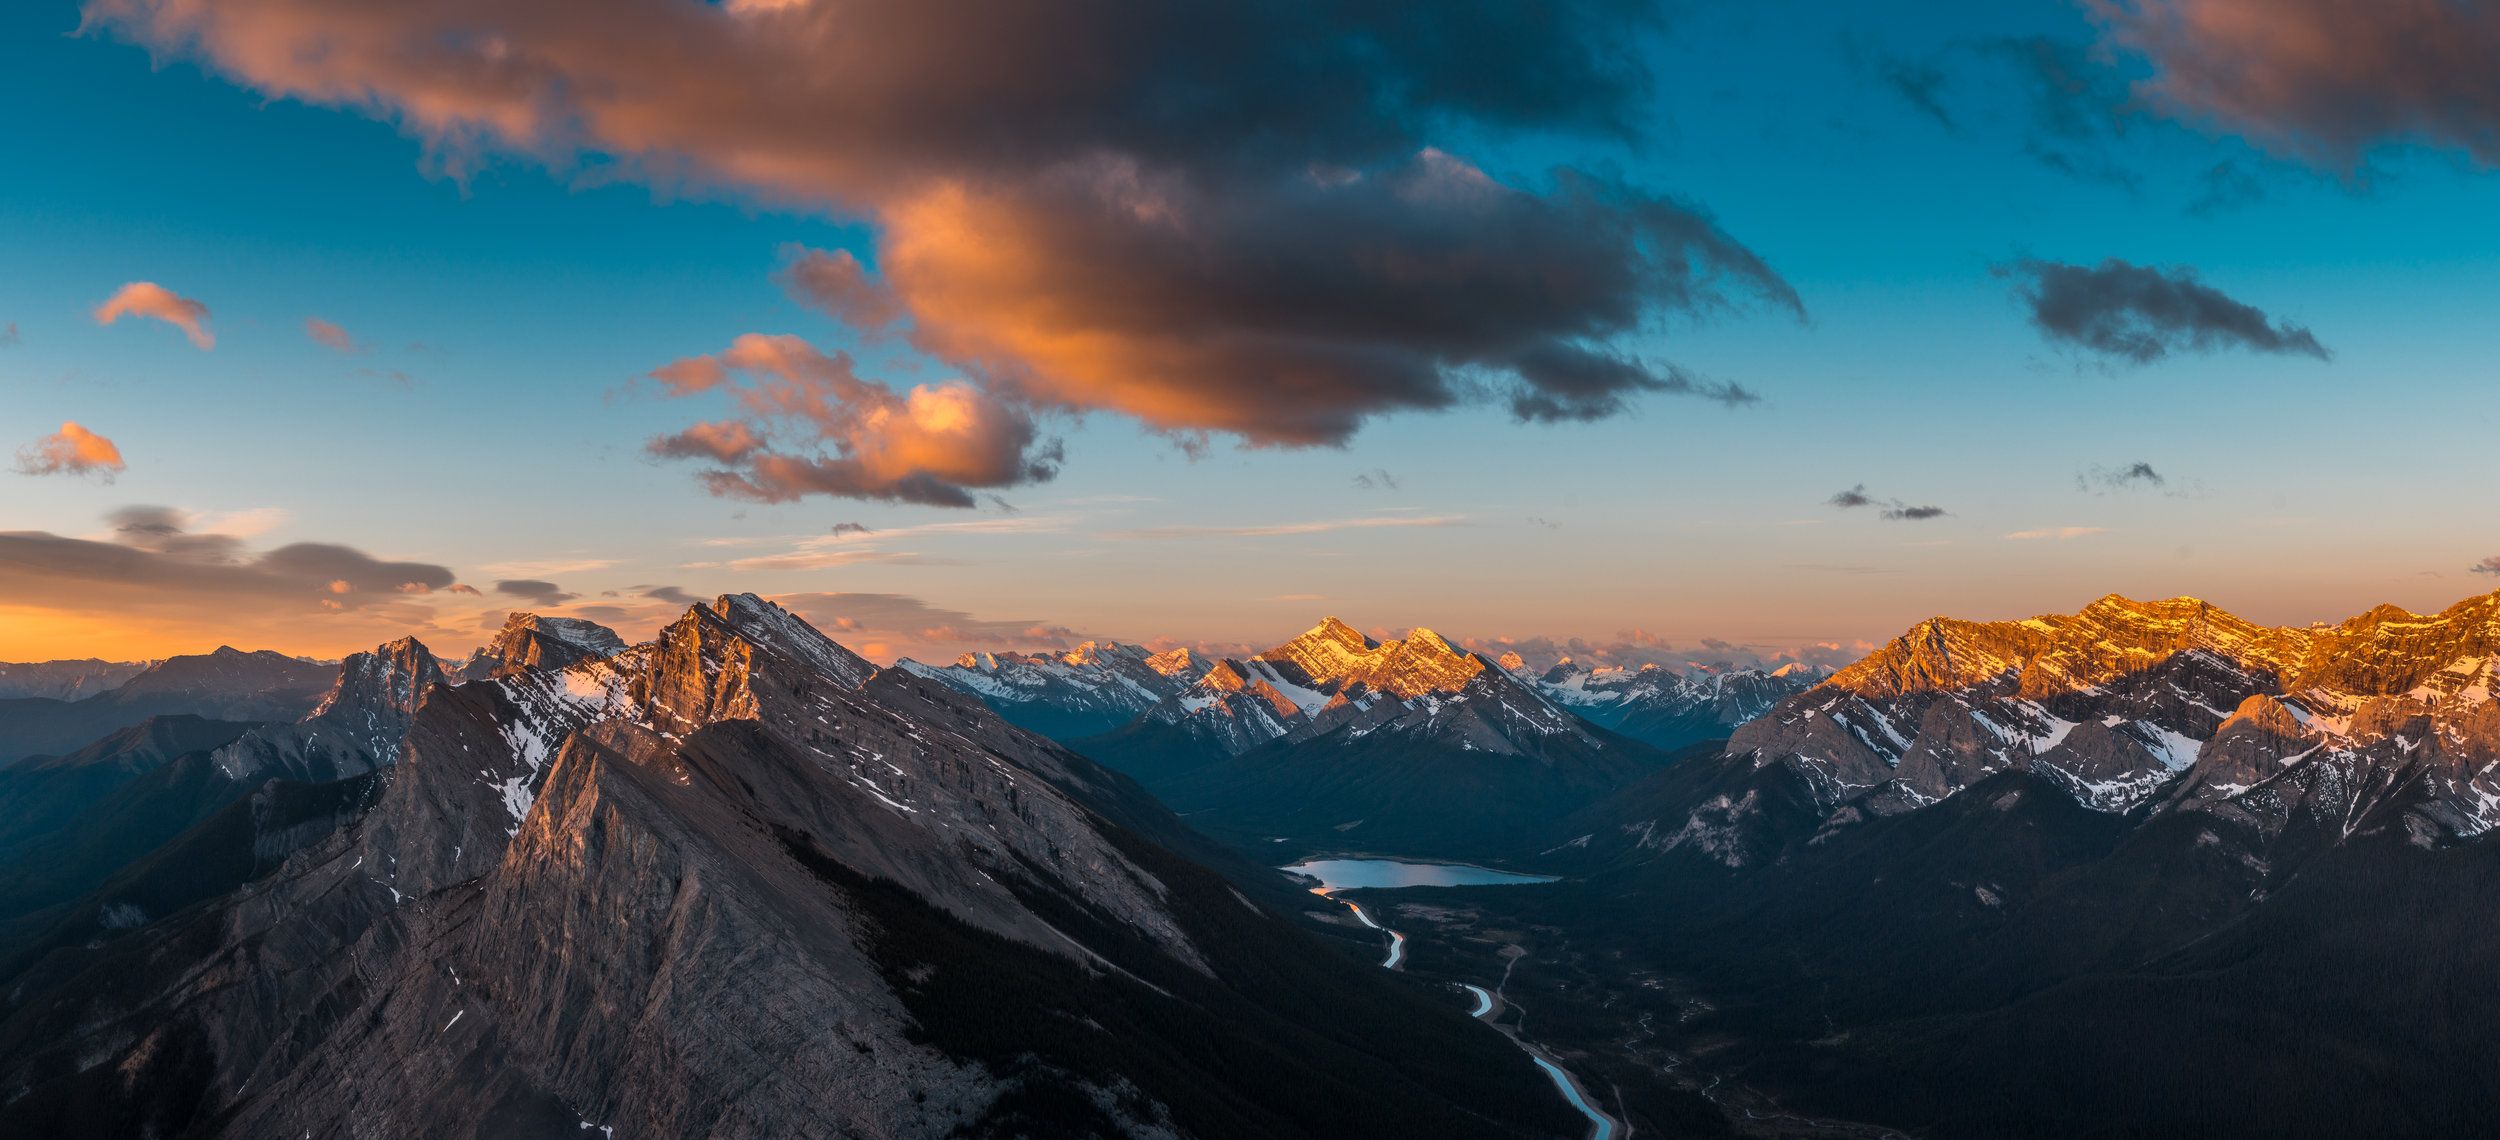 I camped on top of Mount Rundle to capture this sunrise over Kananaskis, Alberta, Canada